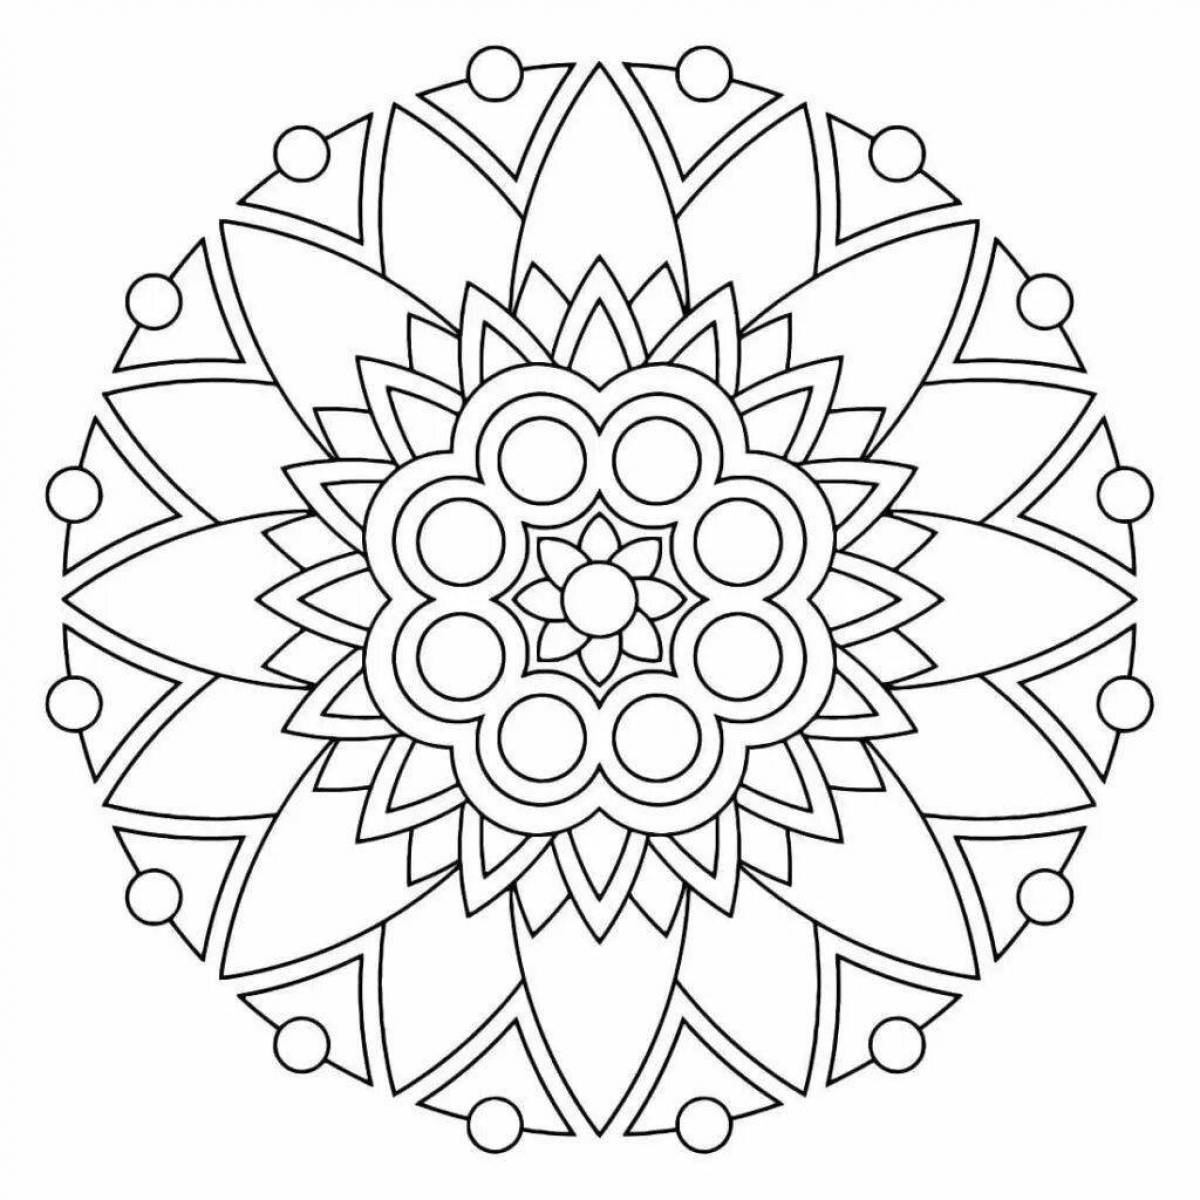 Joyful mantra coloring pages for kids